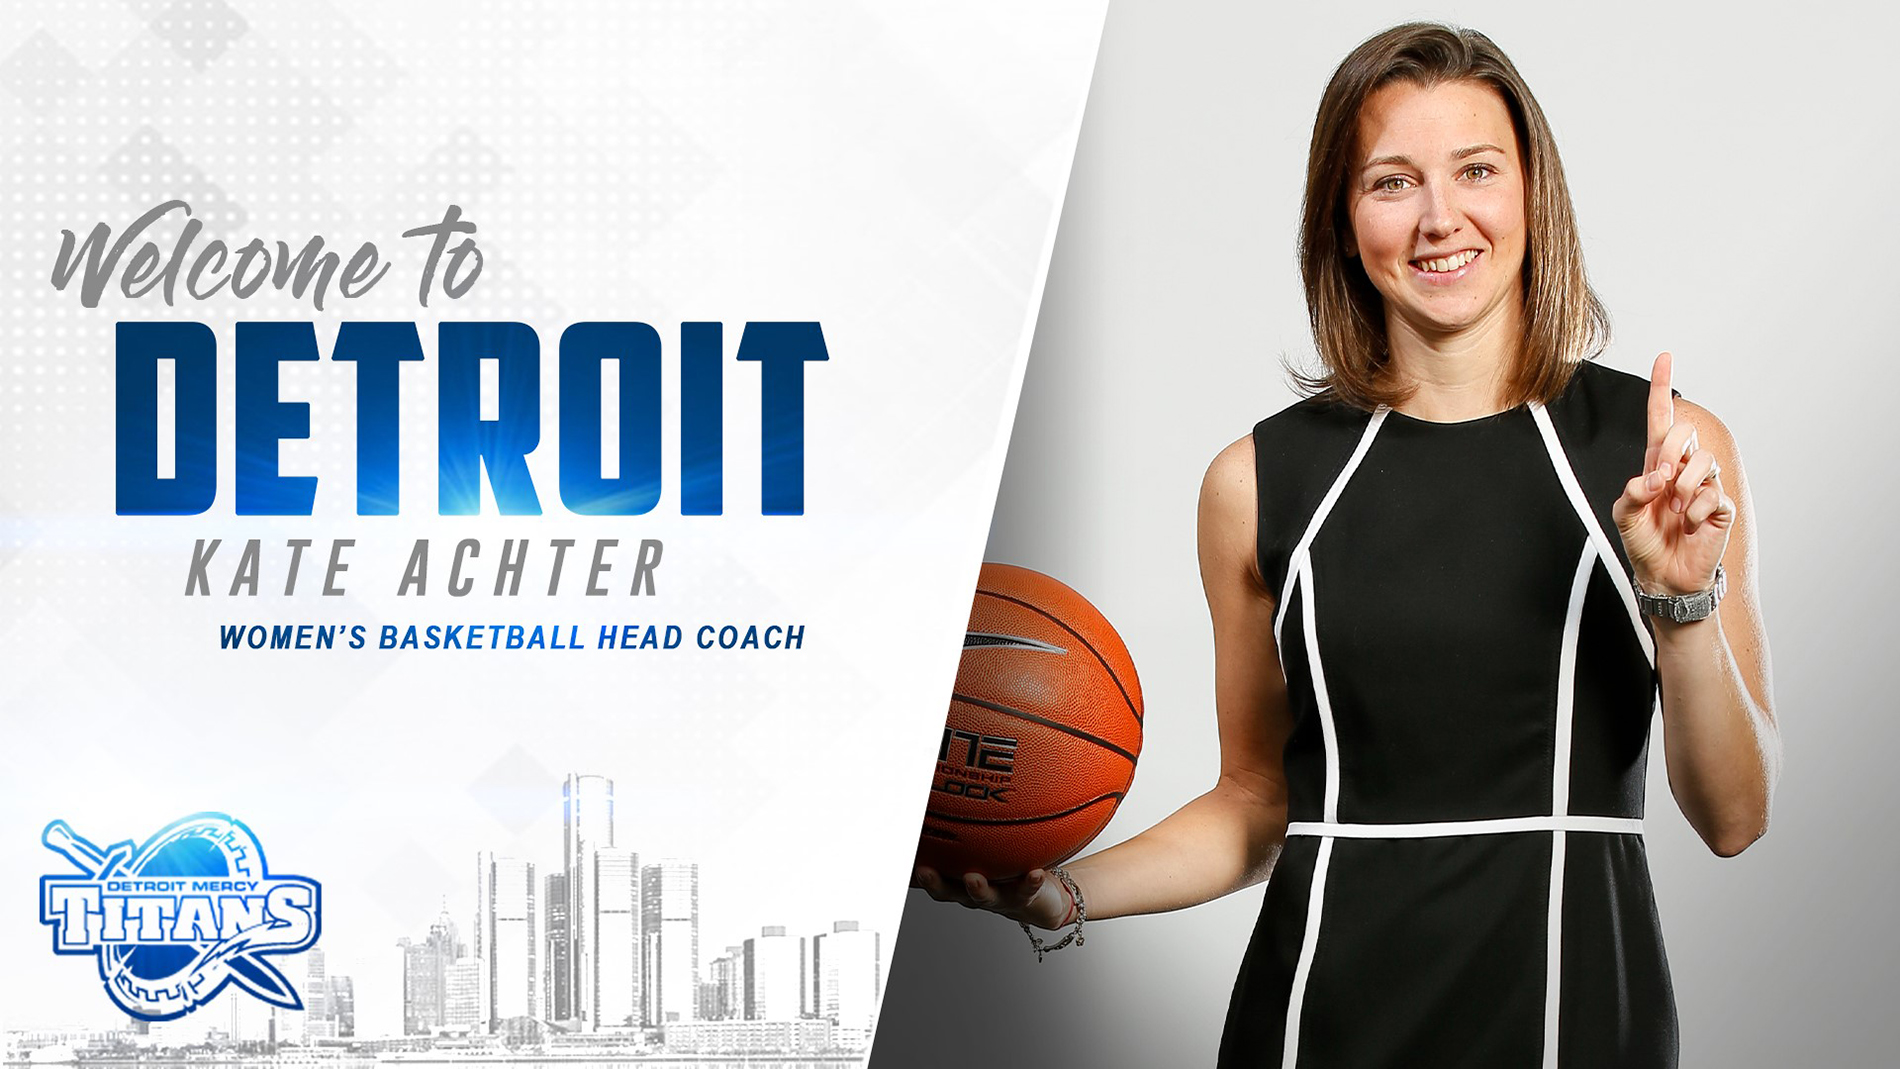 A graphic promoting the hiring of Kate Achter as Detroit Mercy women's basketball head coach. Achter is seen holding a basketball and holding up her index finger. Graphic text reads "Welcome to Detroit Kate Achter, women's basketball head coach."